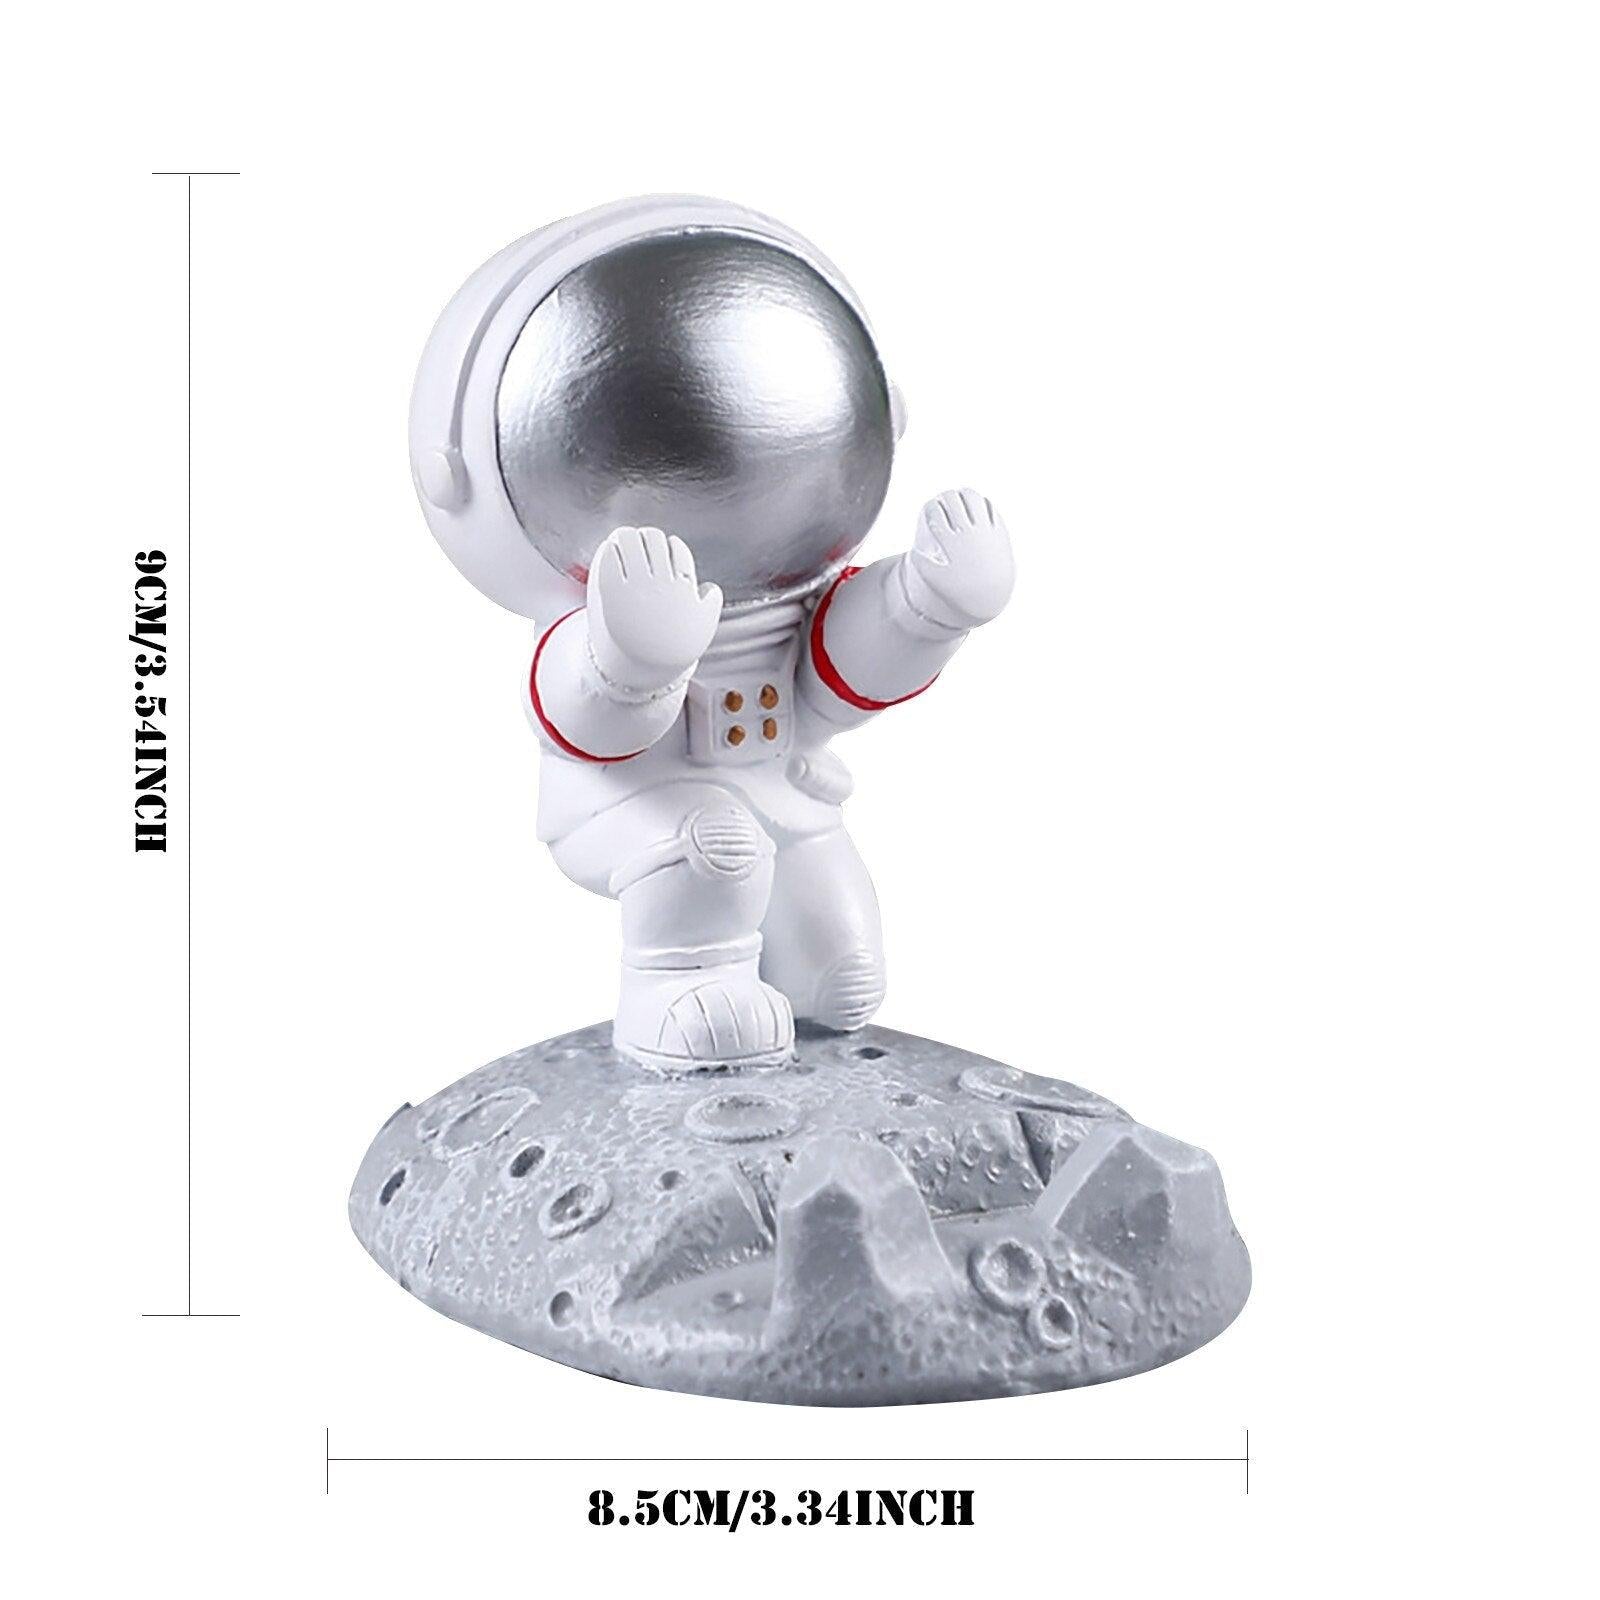 Astronaut Phone Holder - HOW DO I BUY THIS G